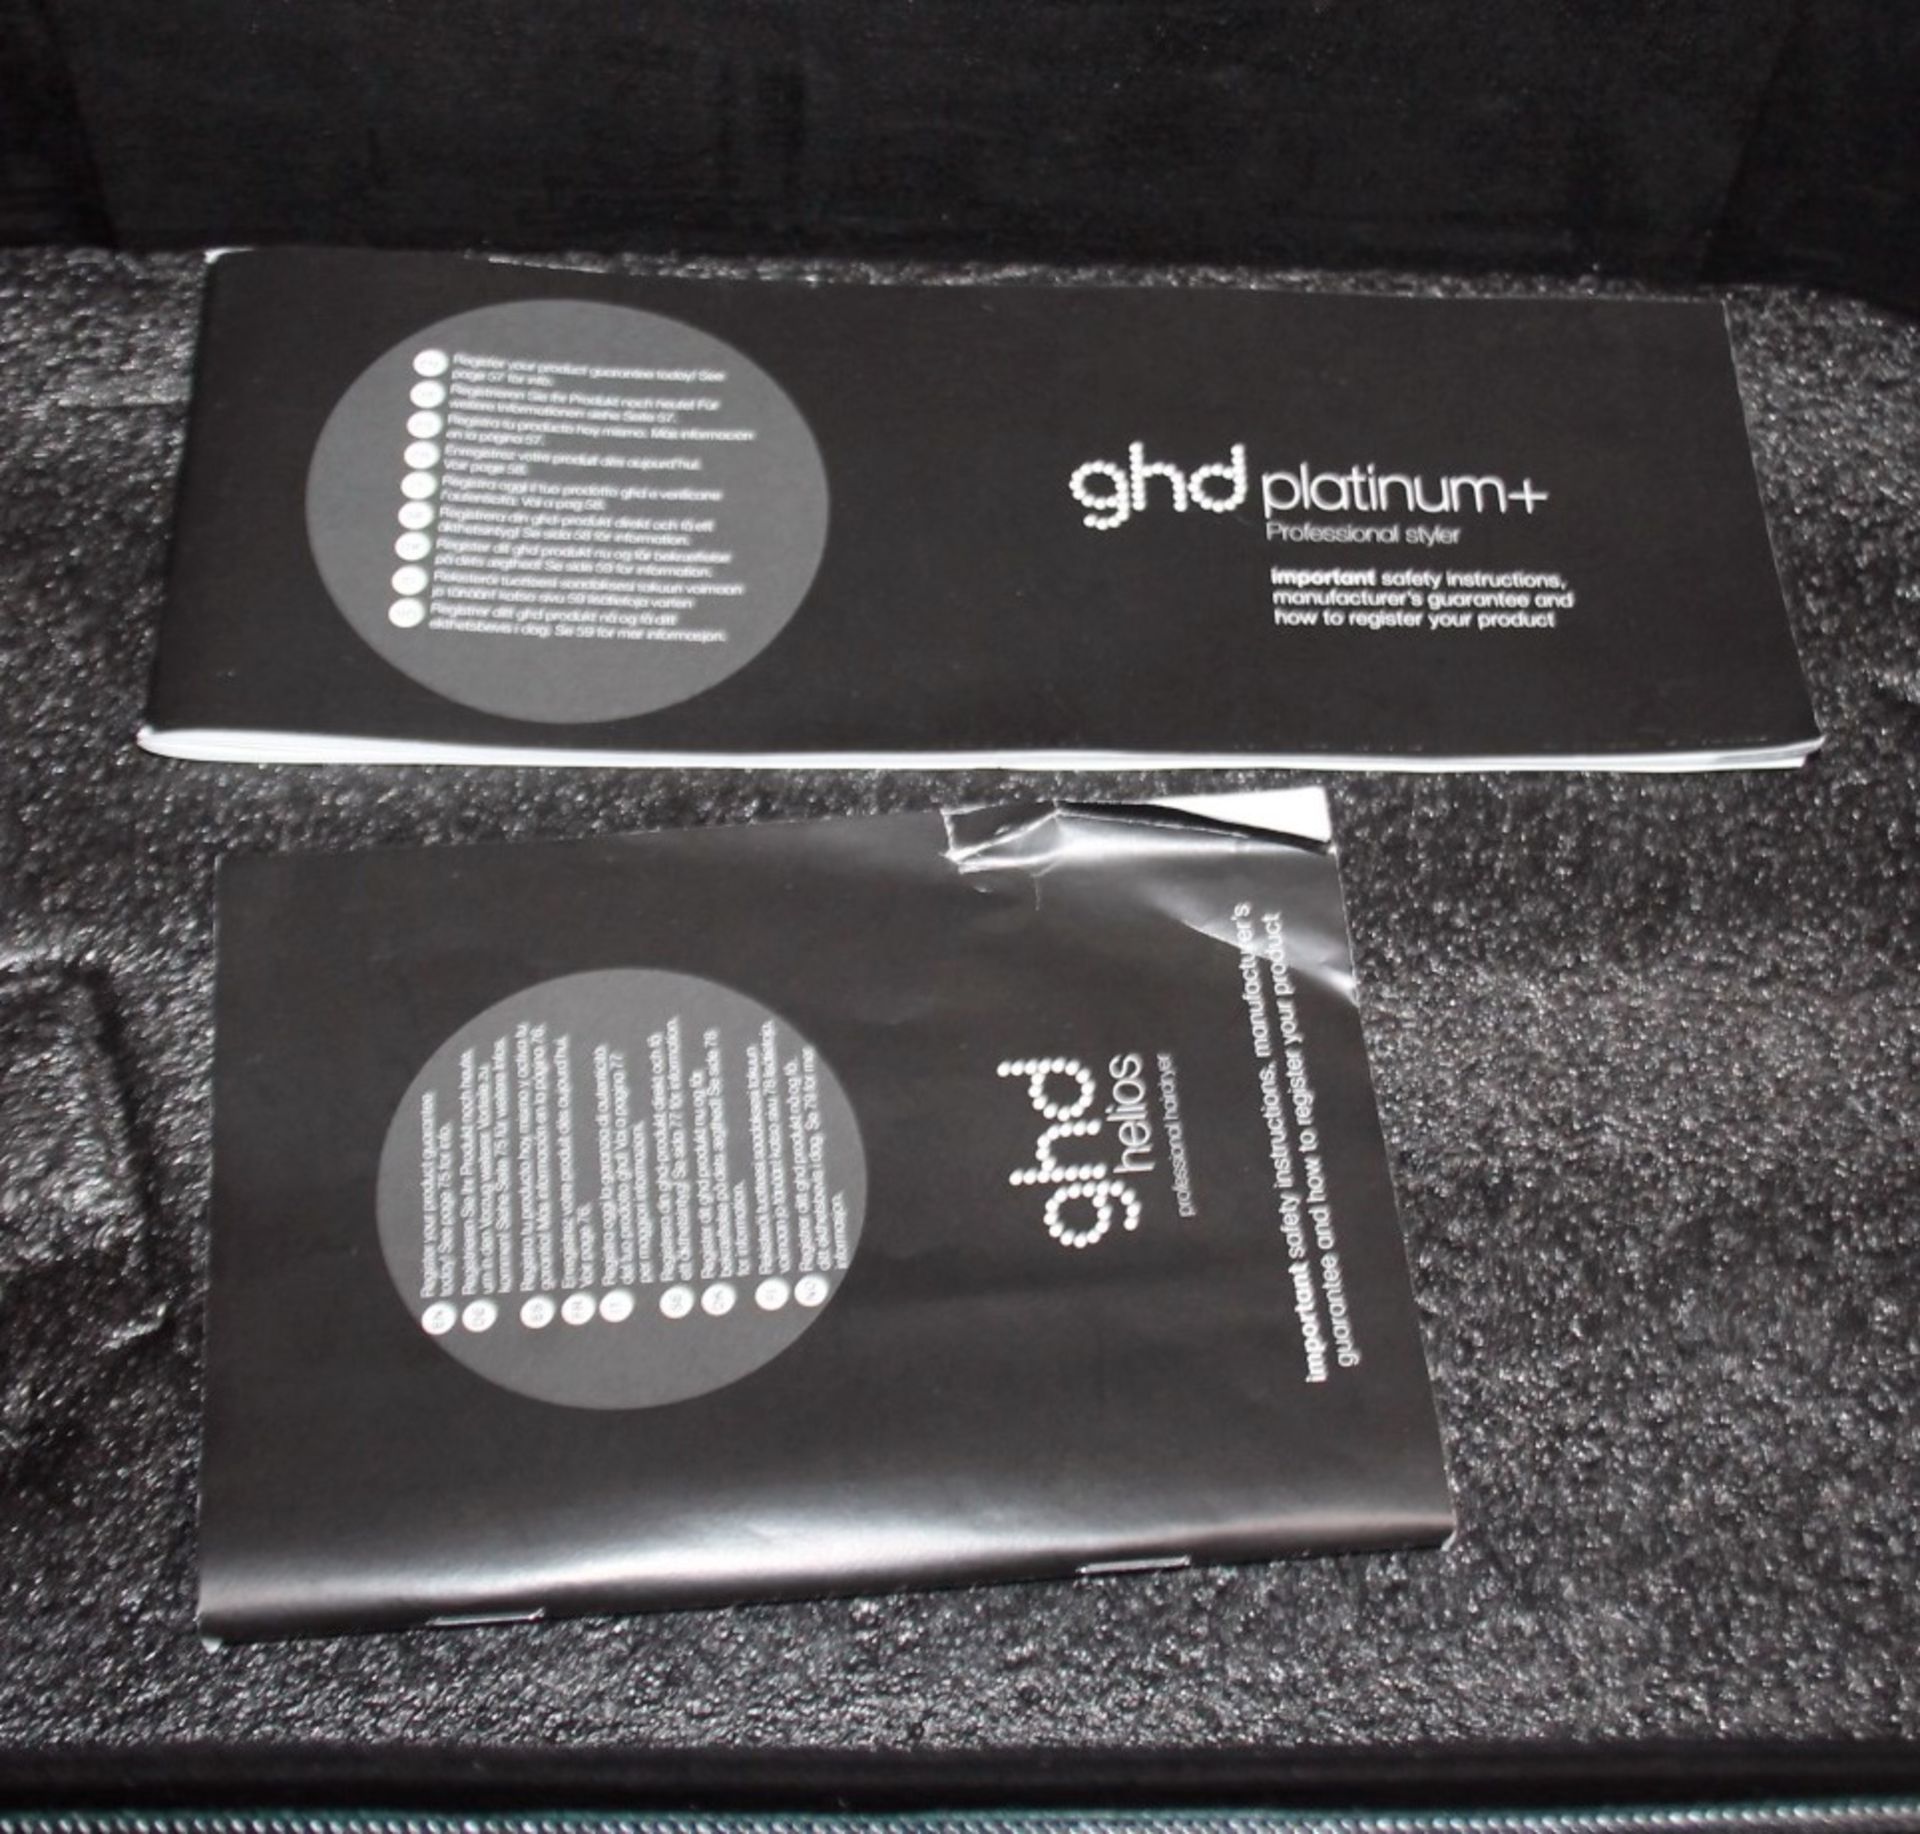 1 x GHD Platinum+ Styler & Helios Hair Dryer Gift Set With Green Case - Original Price £368.00 - Image 9 of 9